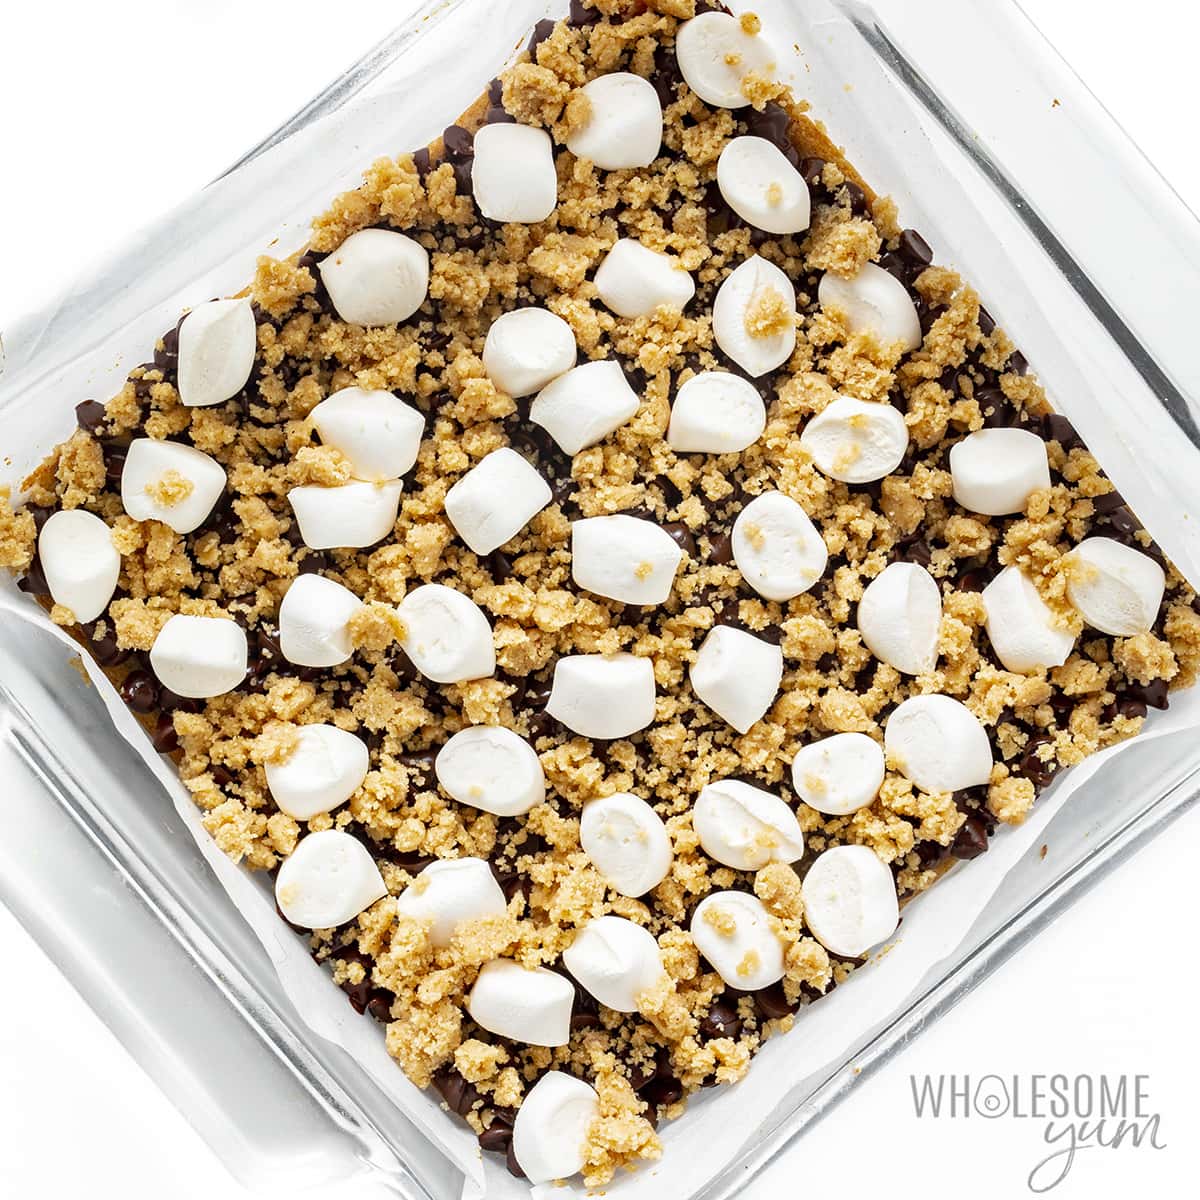 Unbaked smores bars in a pan.